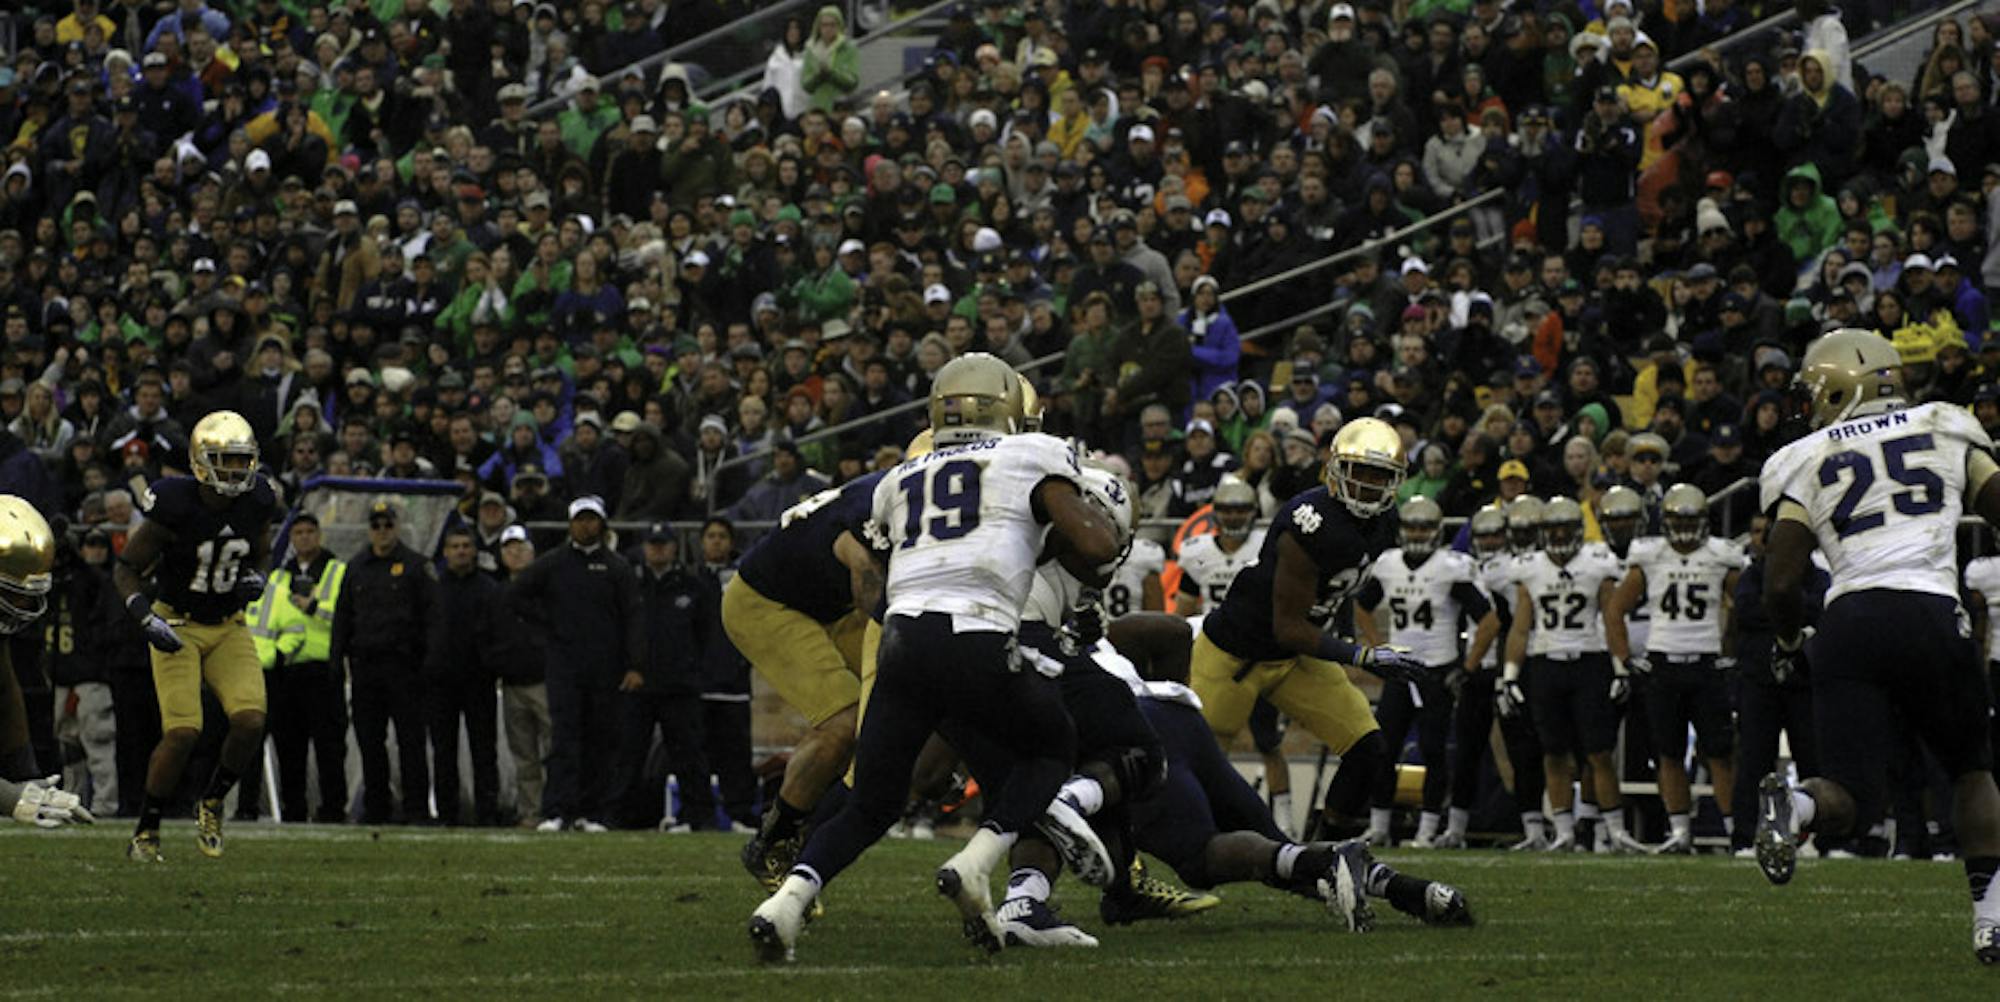 Navy junior quarterback Keenan Reynolds runs the option during Notre Dame’s 38-34 win over the Midshipmen in last season’s meeting at Notre Dame Stadium. The two teams meet again Saturday night at FedEx Field in Landover, Maryland.